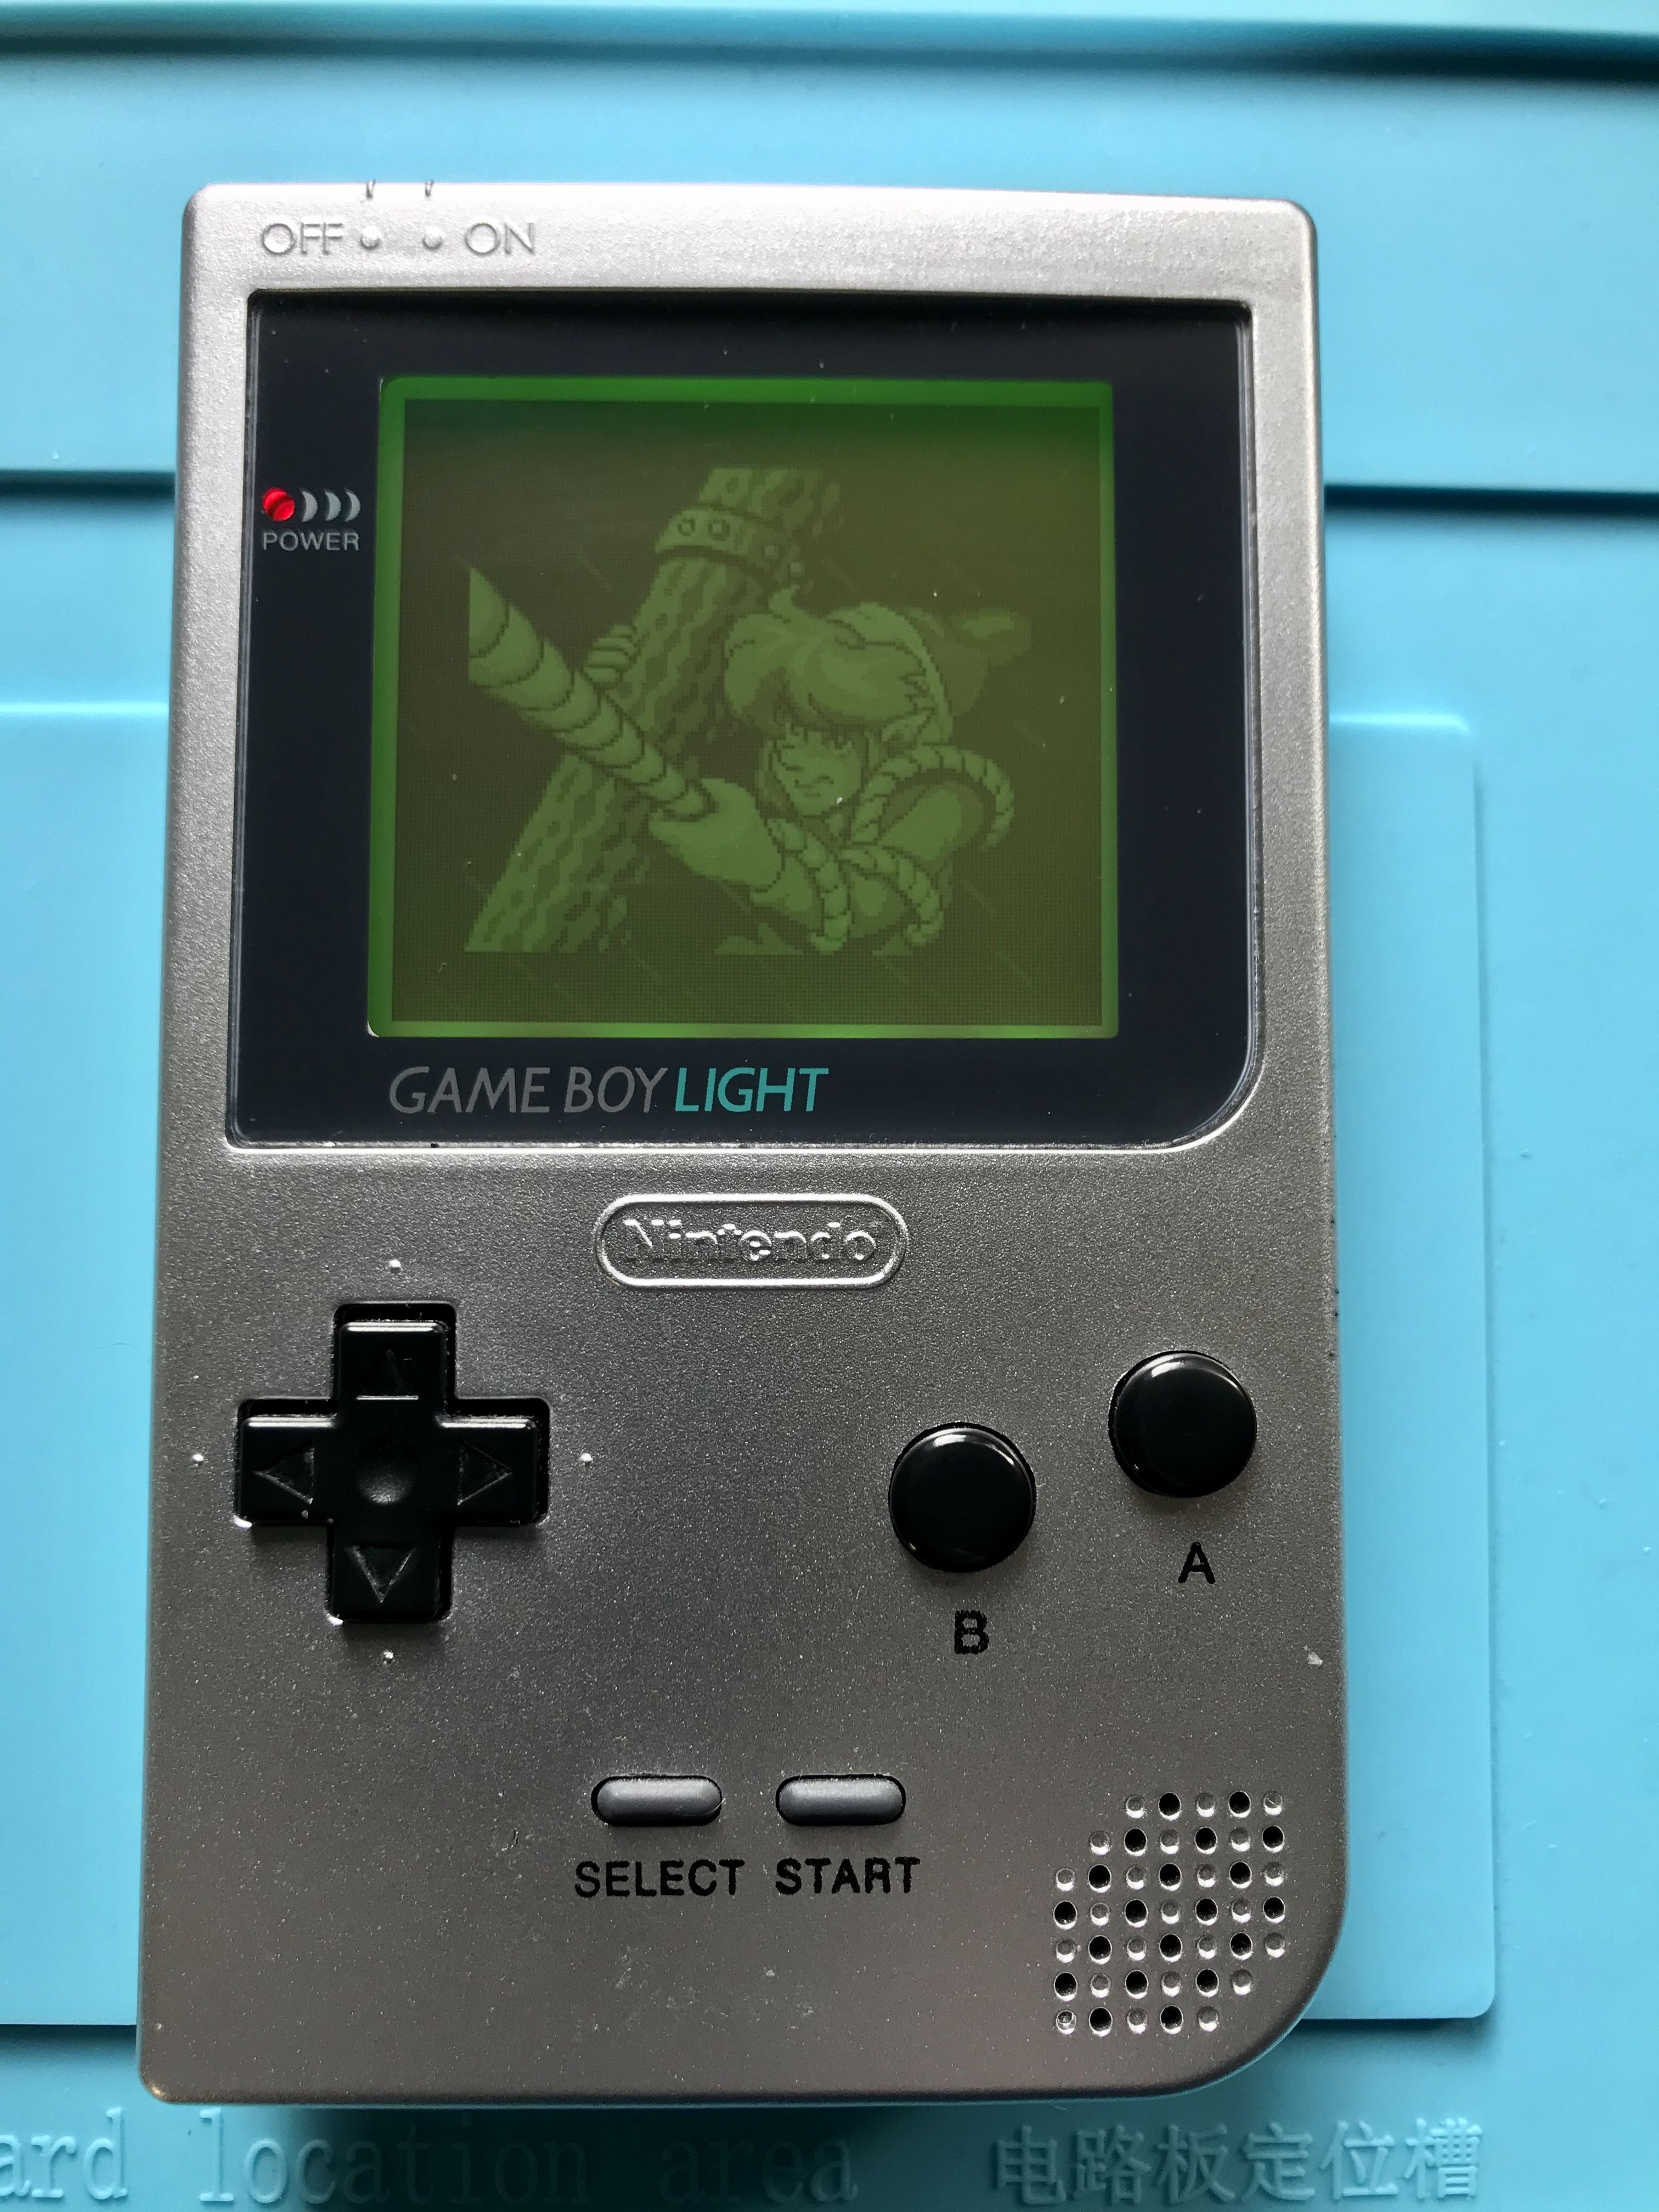 Game Boy Pocket in aftermarket shell with green aftermarket backight